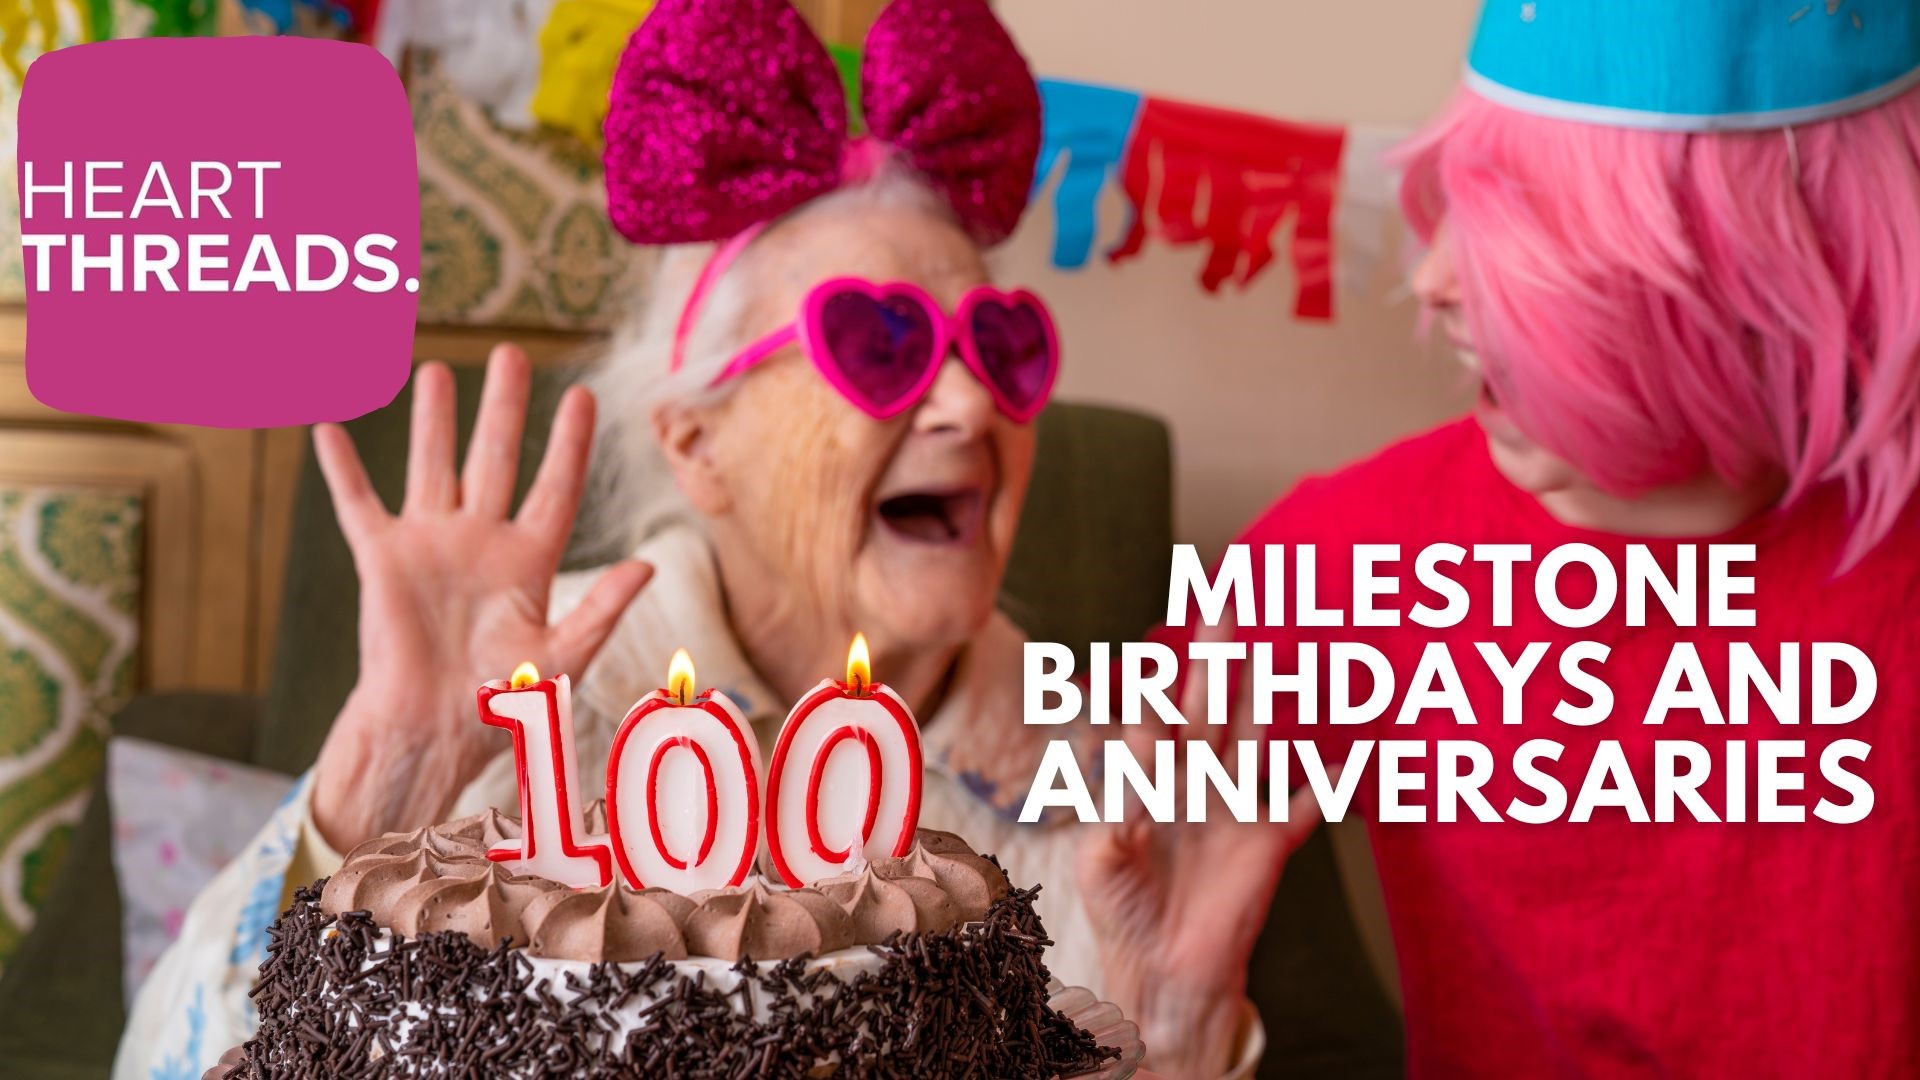 Heartwarming stories that showcase those who have reached the big birthdays and milestones in life. Hear their secrets to longevity and long-lasting marriages.